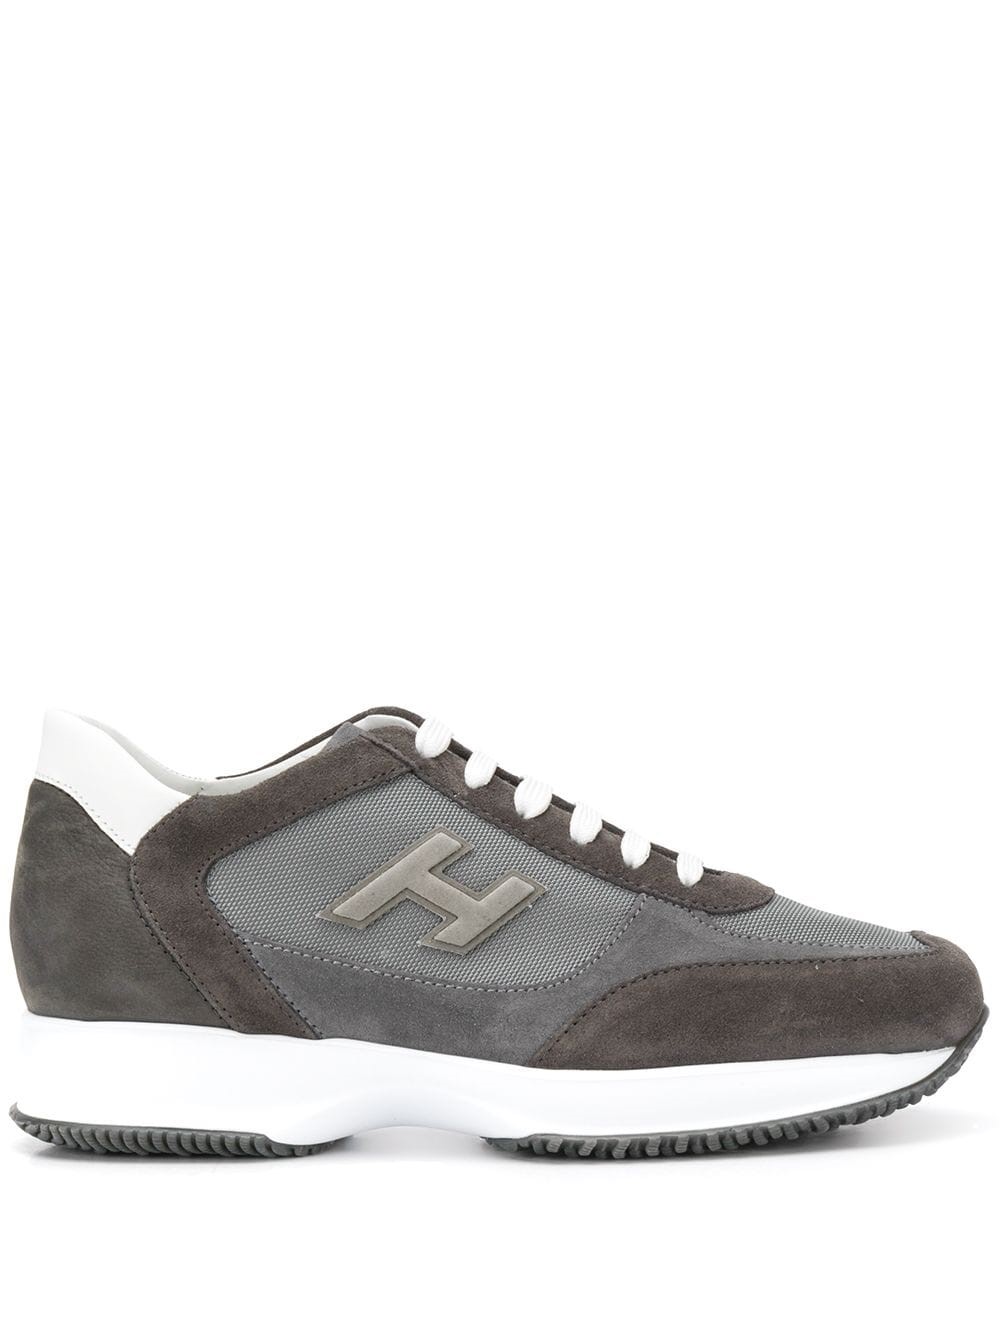 hogan NEW INTERACTIVE SNEAKERS available on montiboutique.com - 32755